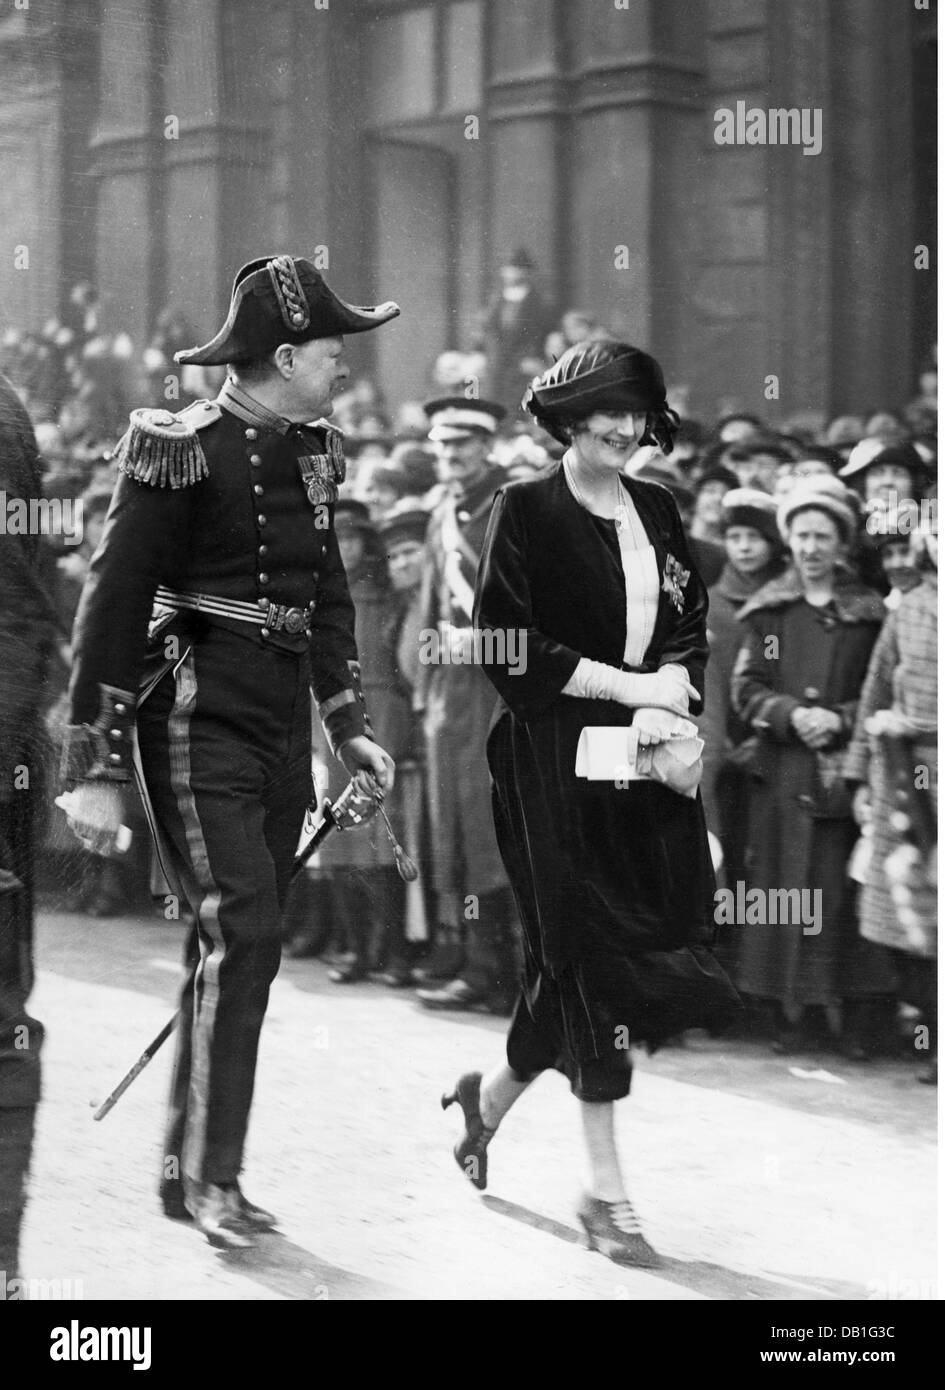 Churchill, Winston Spencer, 30.11.1874 - 24.1.1965, British politician (Lib.), Secretary of State for the Colonies 13.2.1921 - 19.10.1922, with wife Clementine during of the wedding of princess Mary of Great Britain, Westminster, London, 28.2.1922, Stock Photo